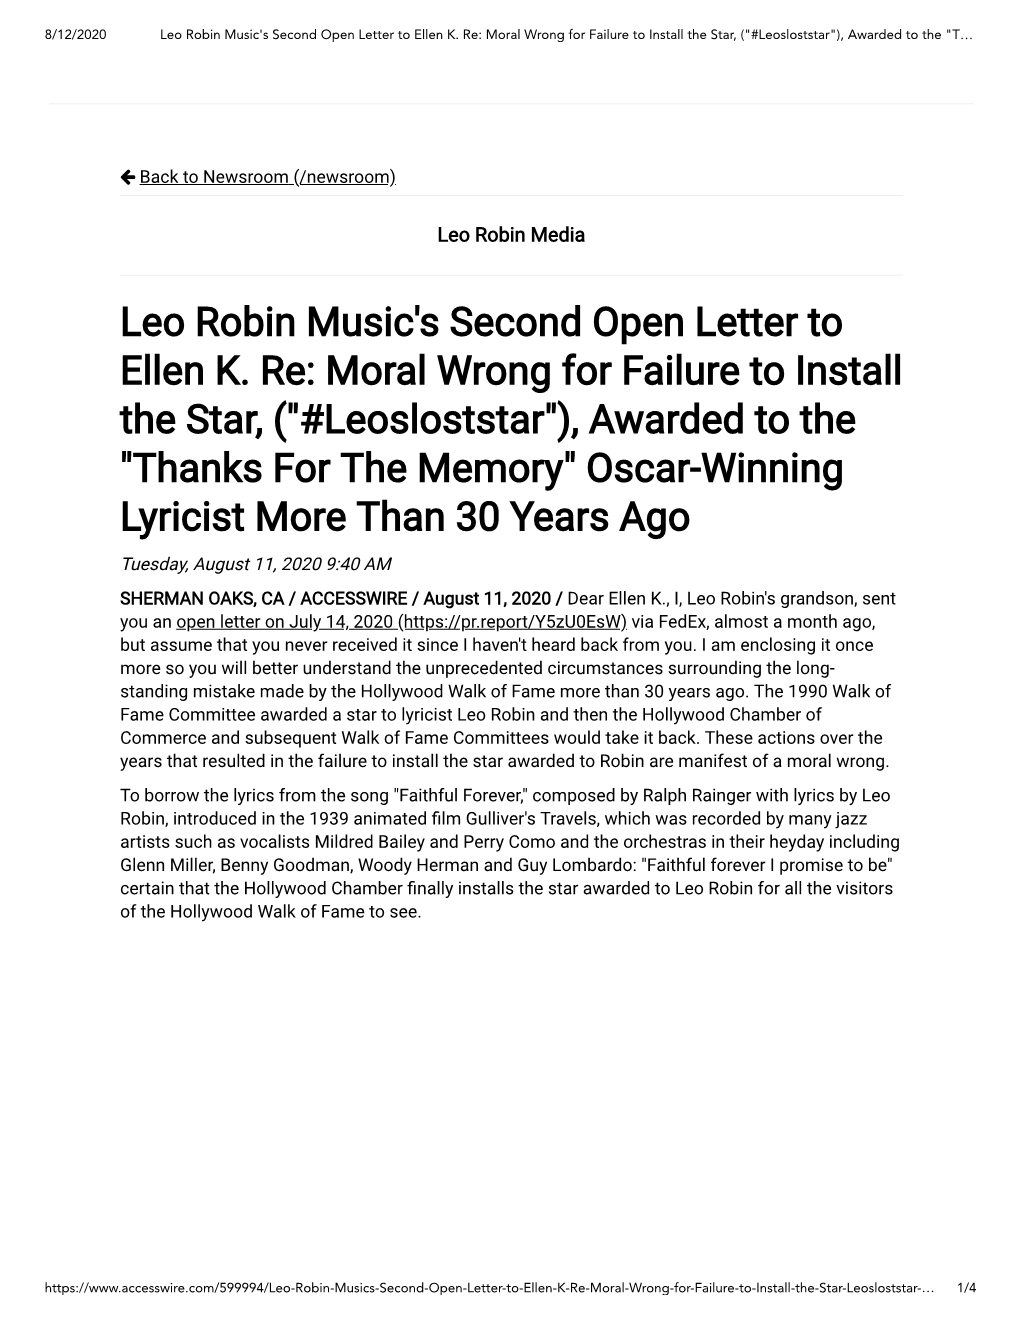 Leo Robin Music's Second Open Letter to Ellen K. Re: Moral Wrong for Failure to Install the Star, ("#Leosloststar"), Awarded to the "T…